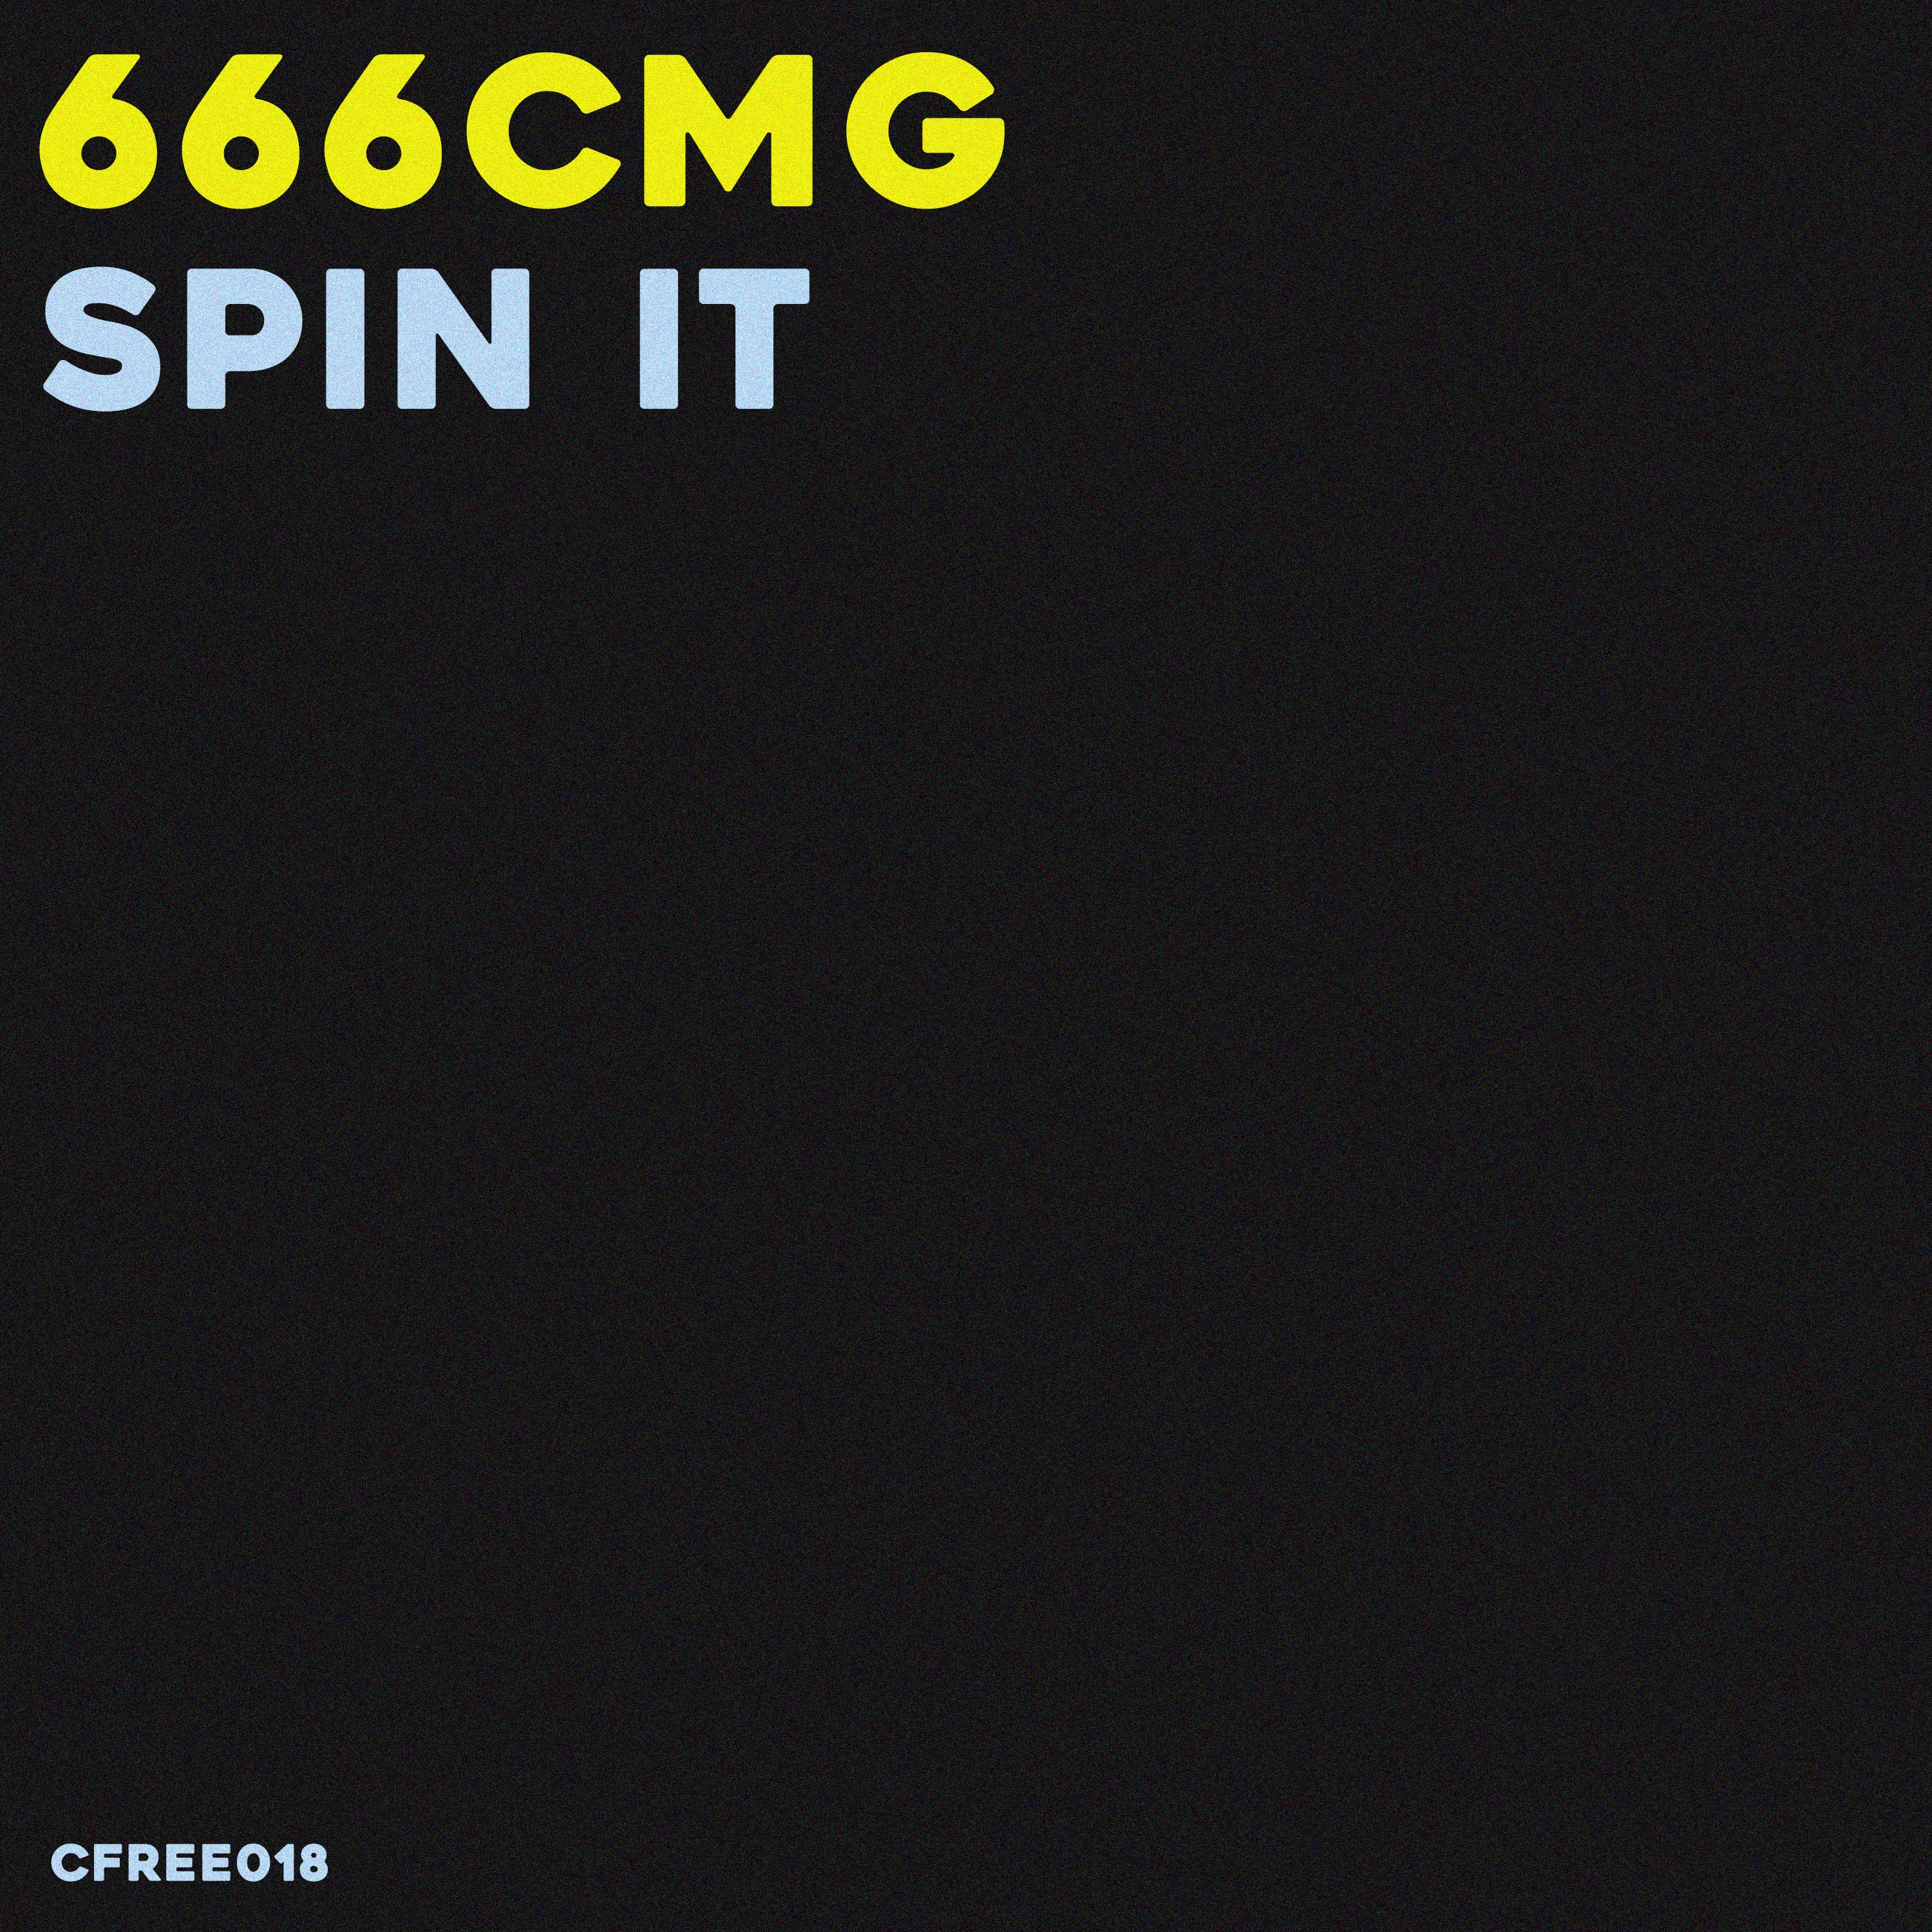 [CFREE018] 666cmg – Spin It